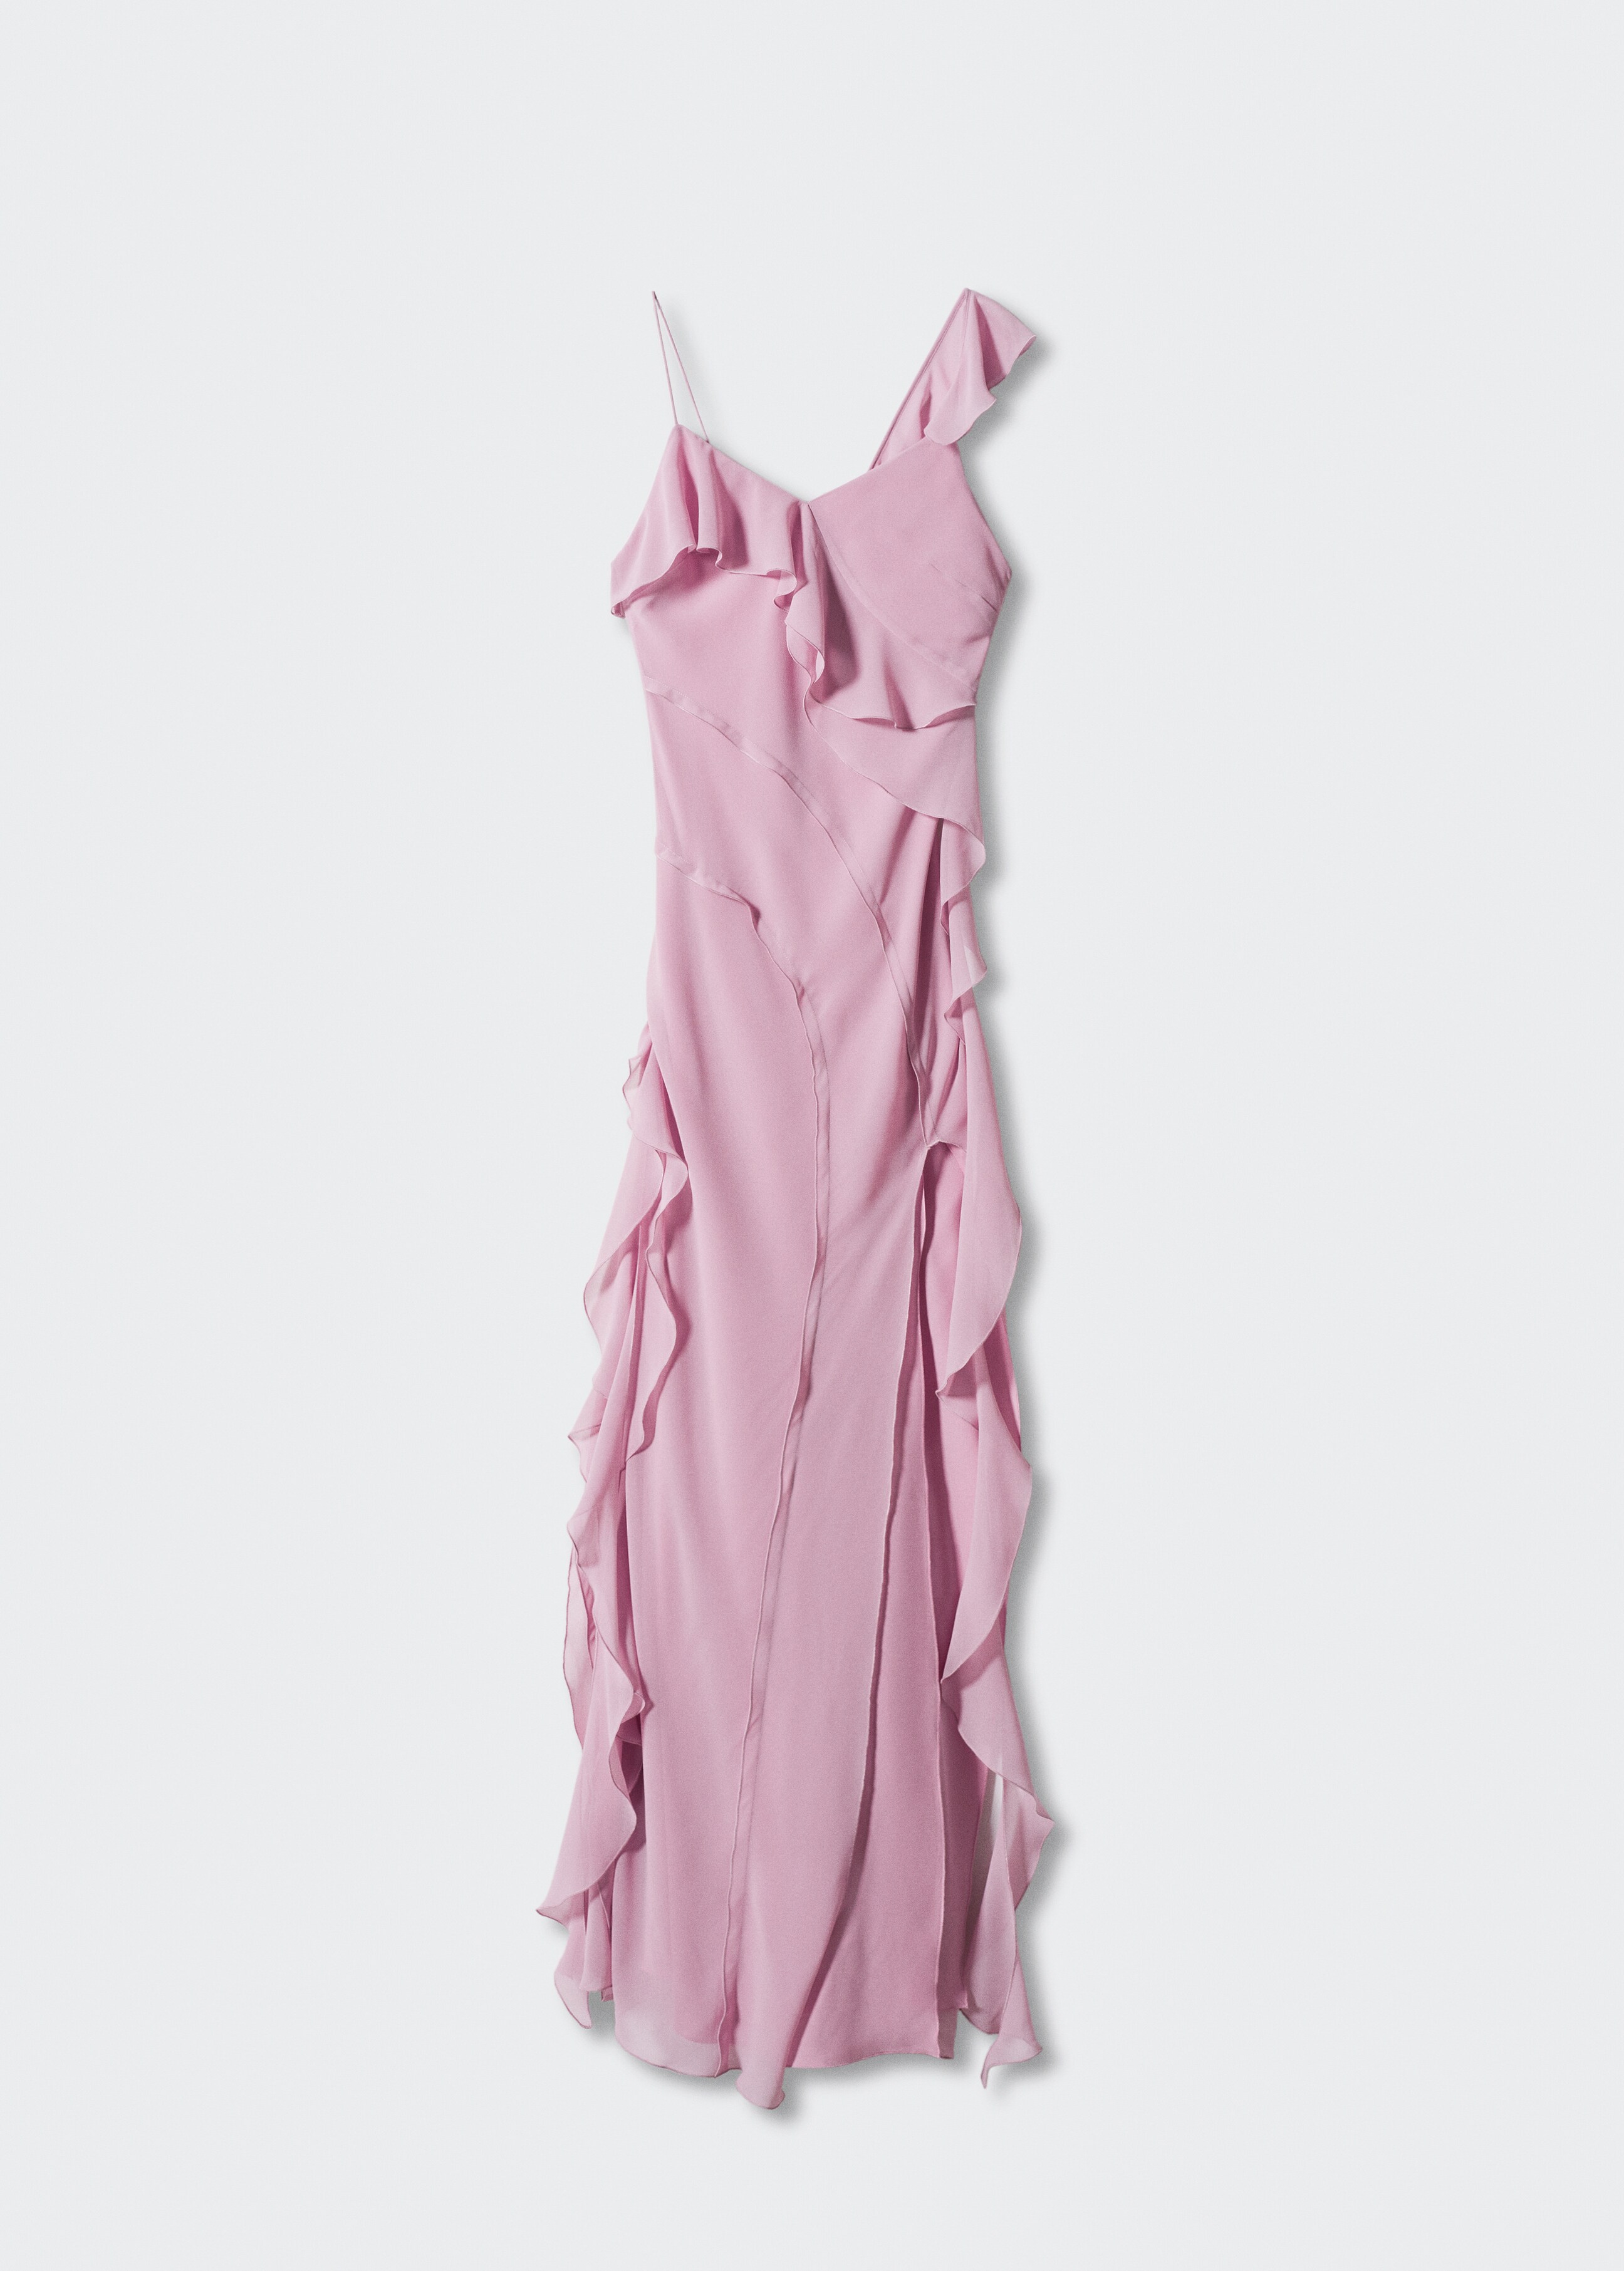 Ruffles slit dress - Article without model